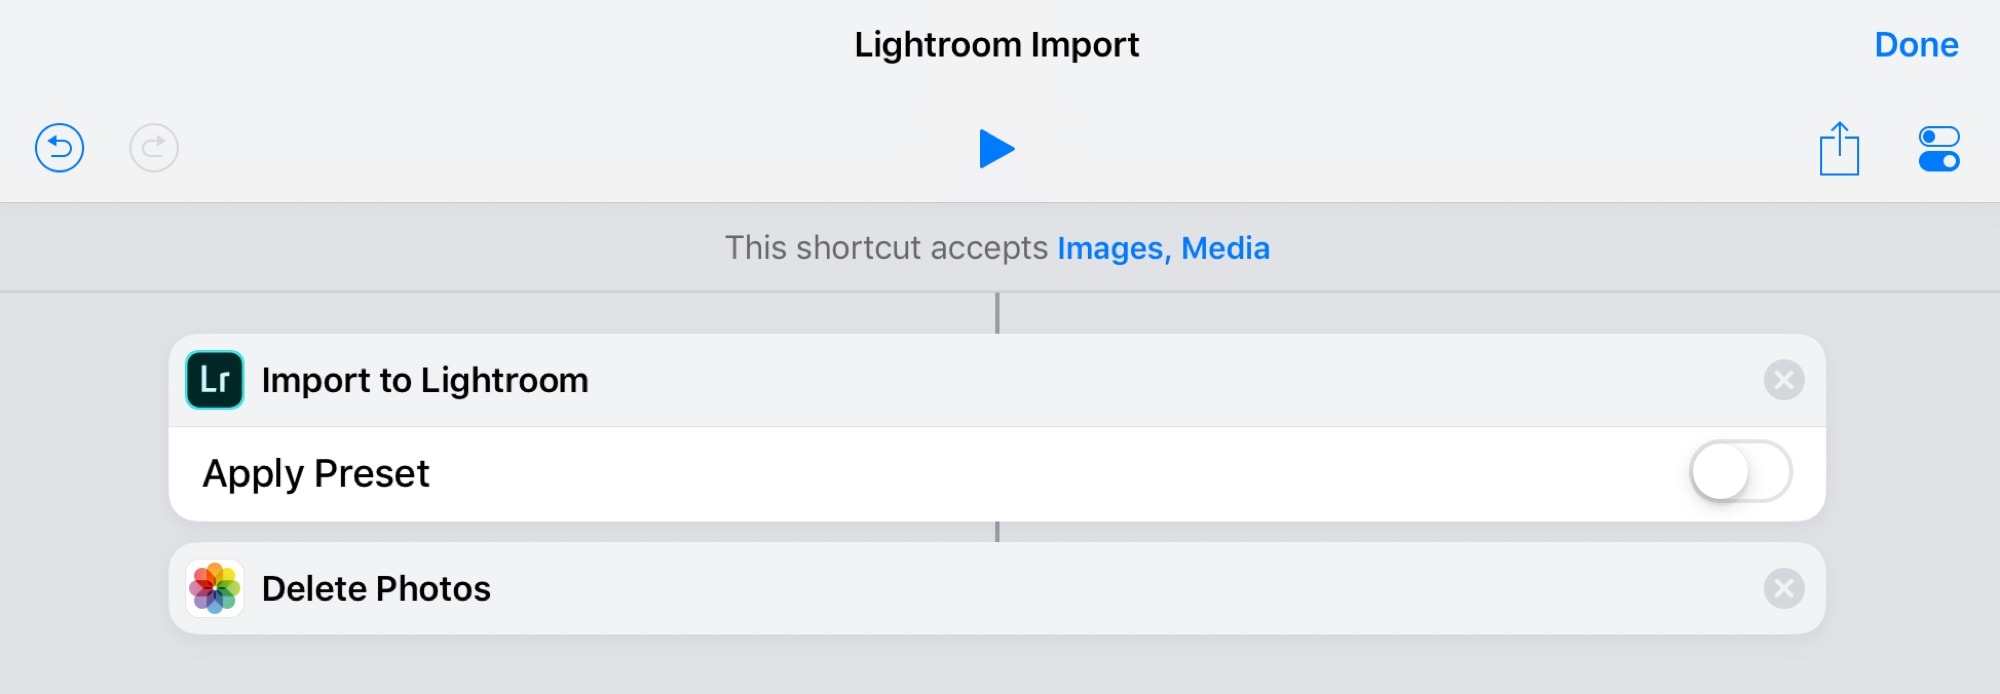 A simple shortcut to import photos, and delete the originals.